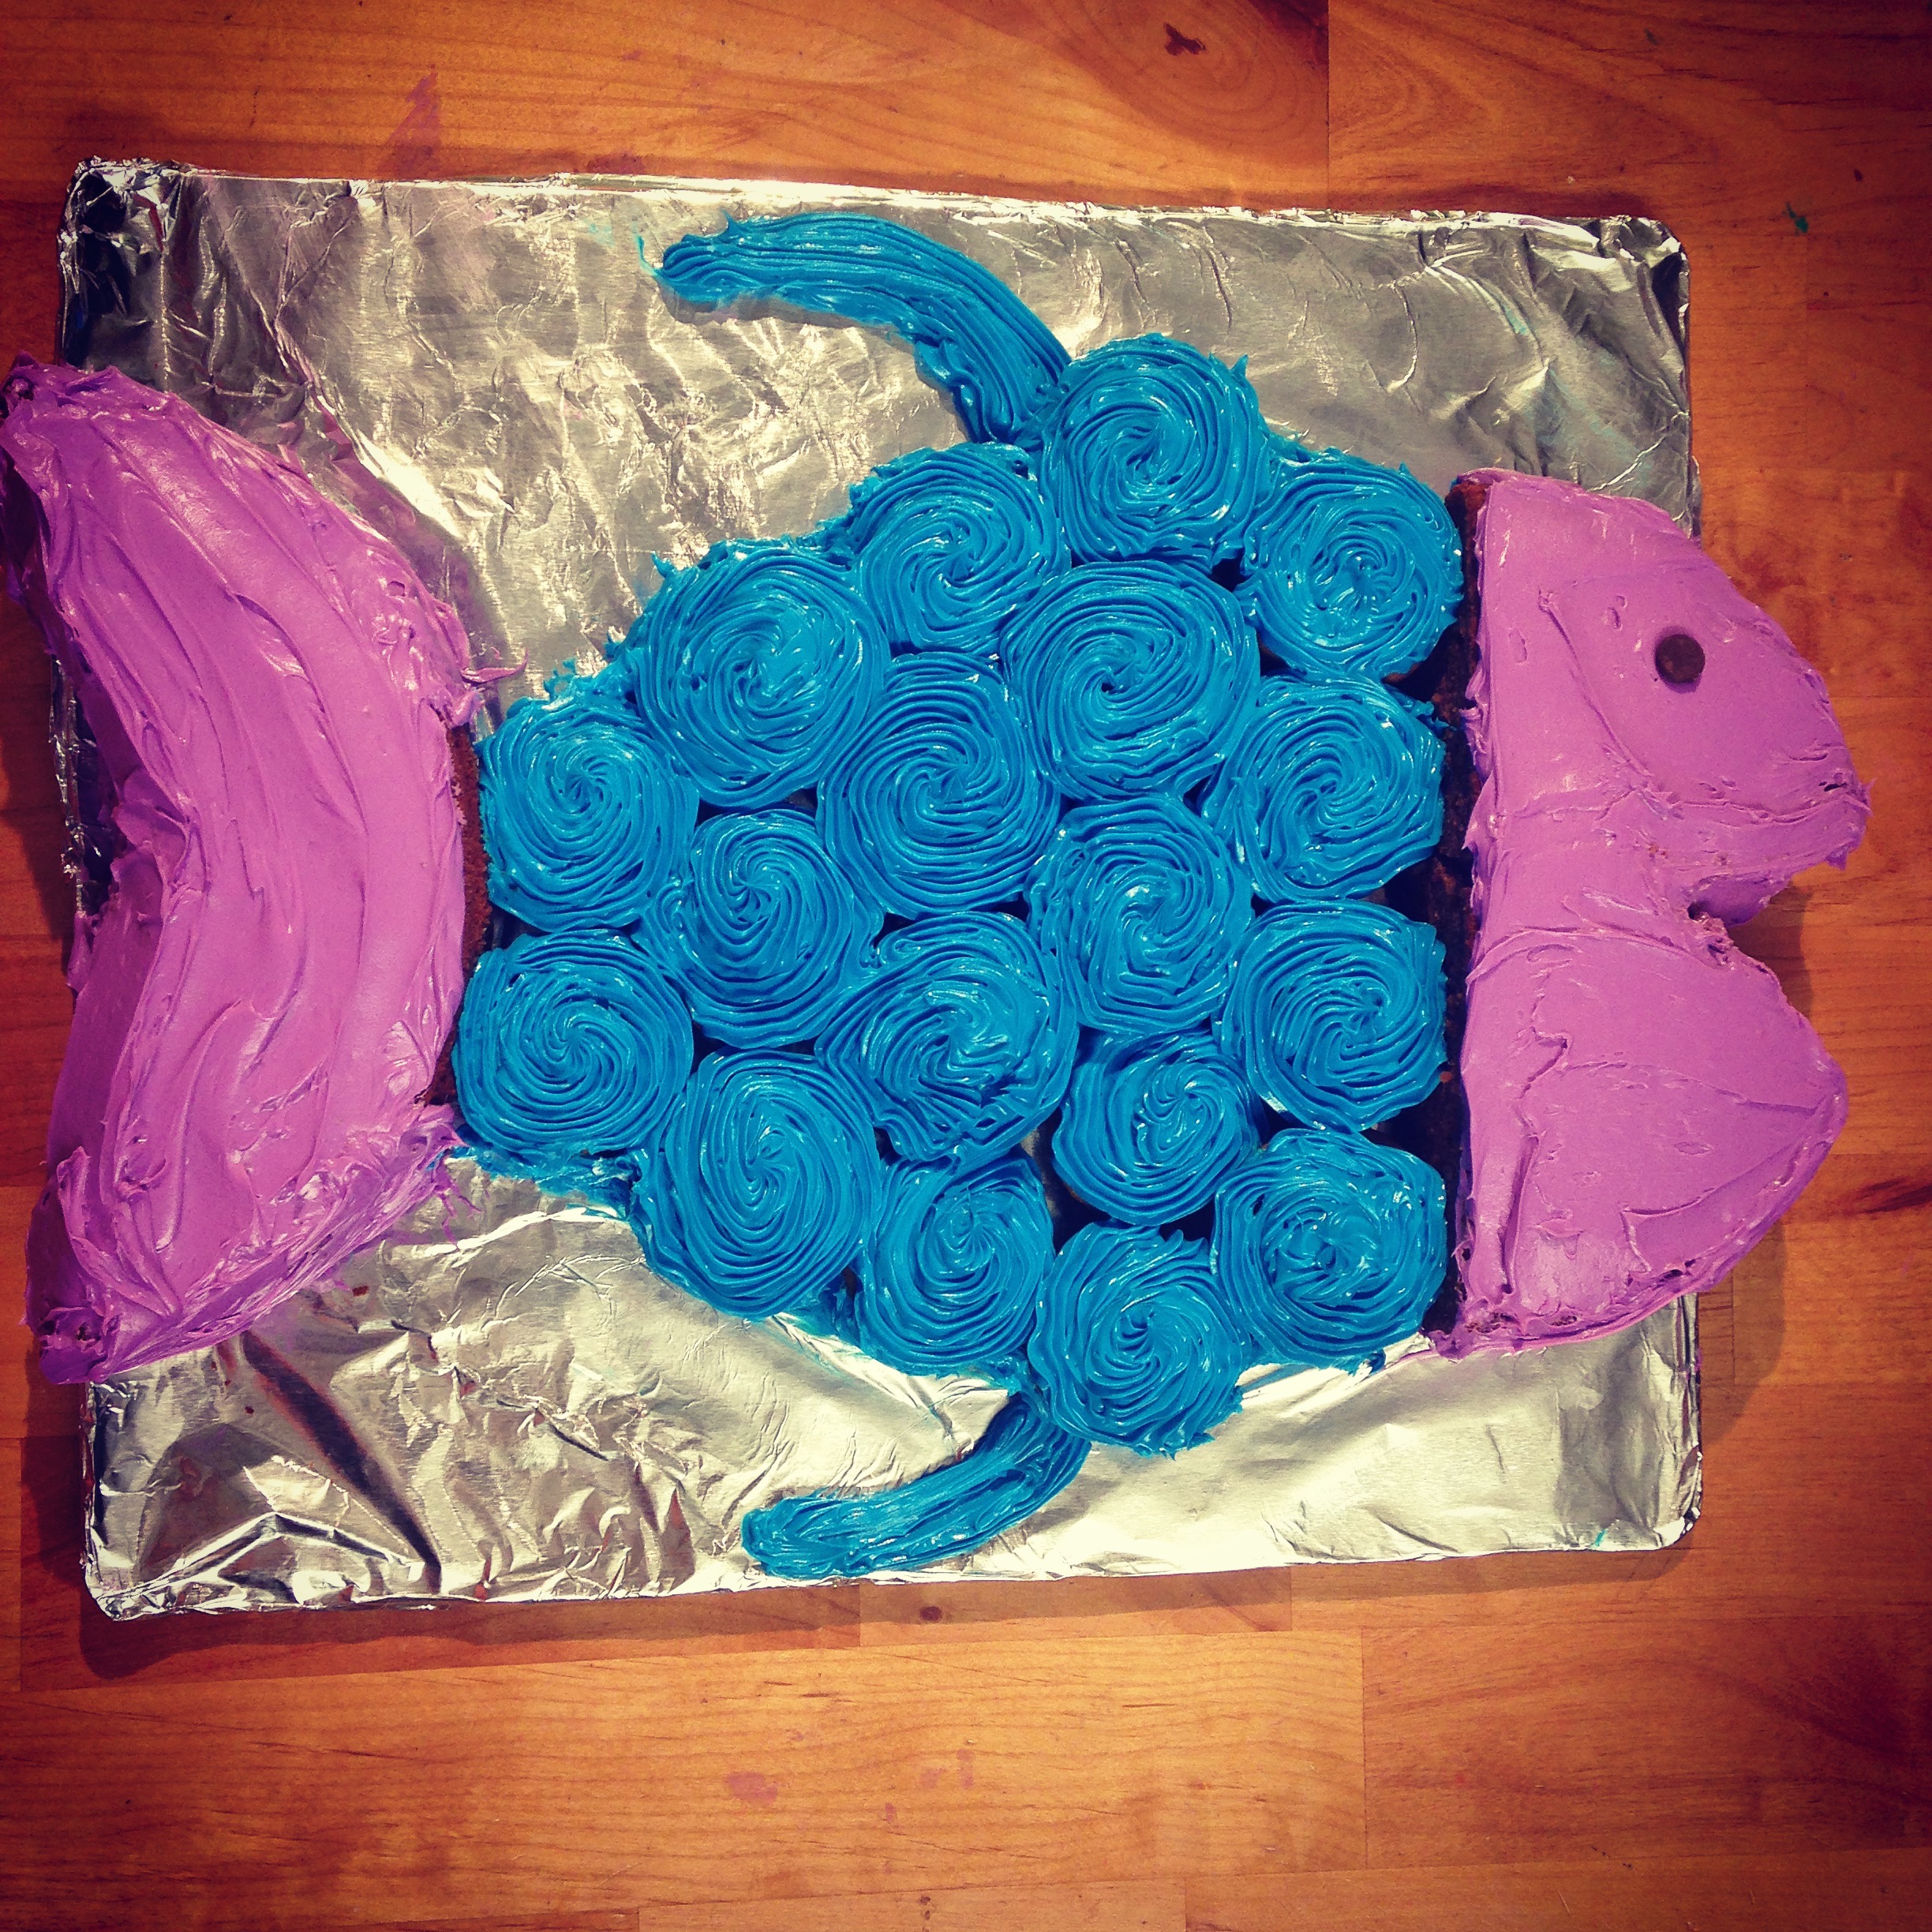 How to Bake a Fish Cake!